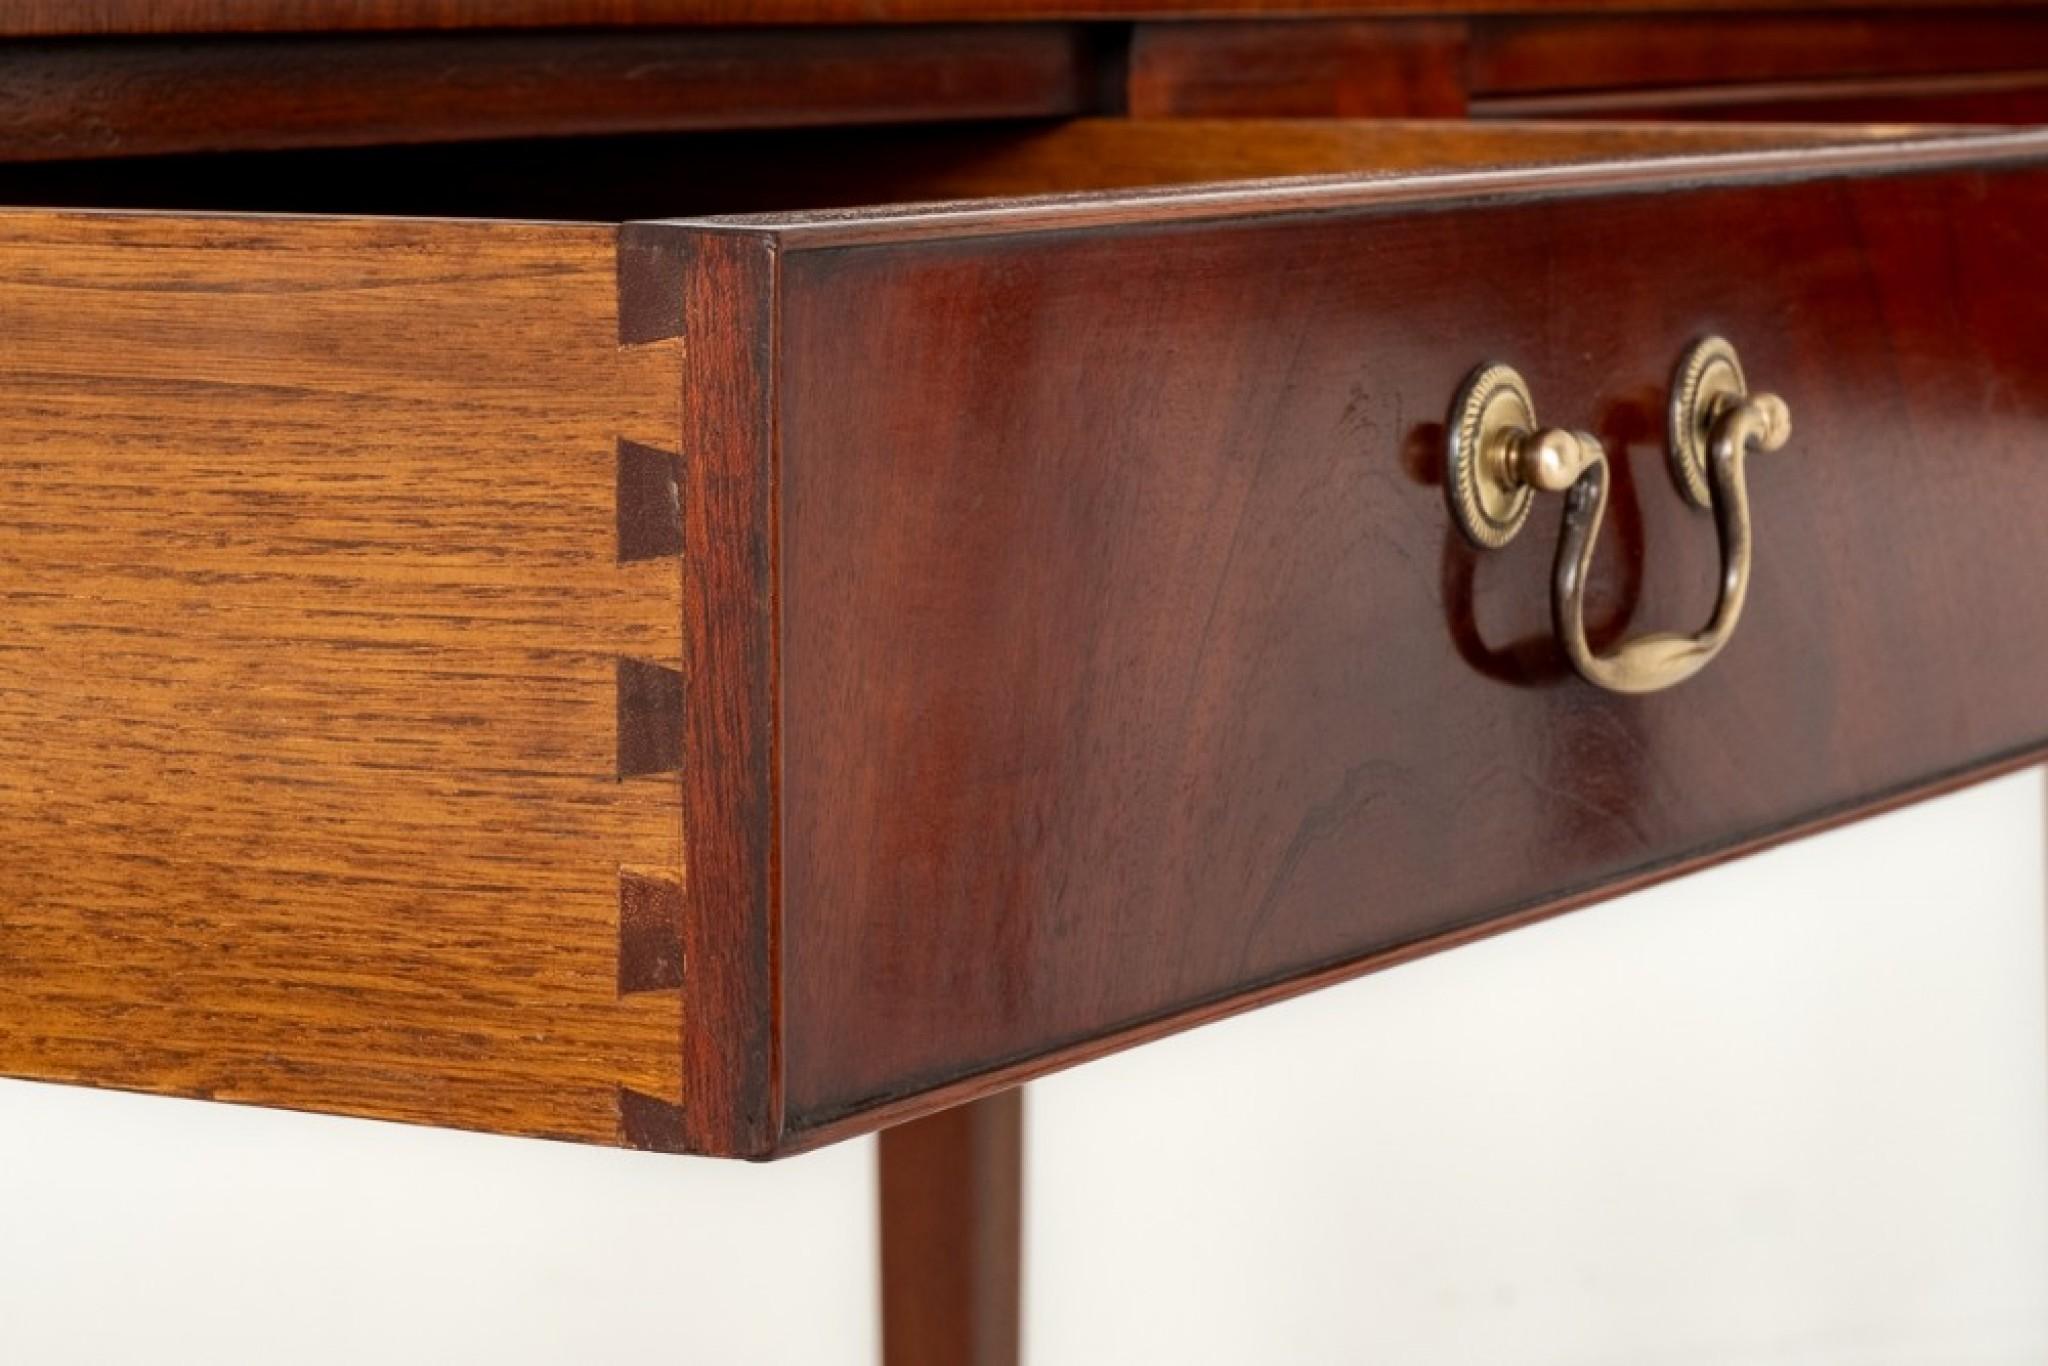 Pair of Regency Revival Mahogany Console Tables.
This Elegant Pair of Console Tables Both Feature 2 x Oak Lined
Drawers with Brass Swan Neck Handles.
Standing Upon Elegant Tapered Legs with Brass Castors.
Circa 1920
The Tops of the Tables Having